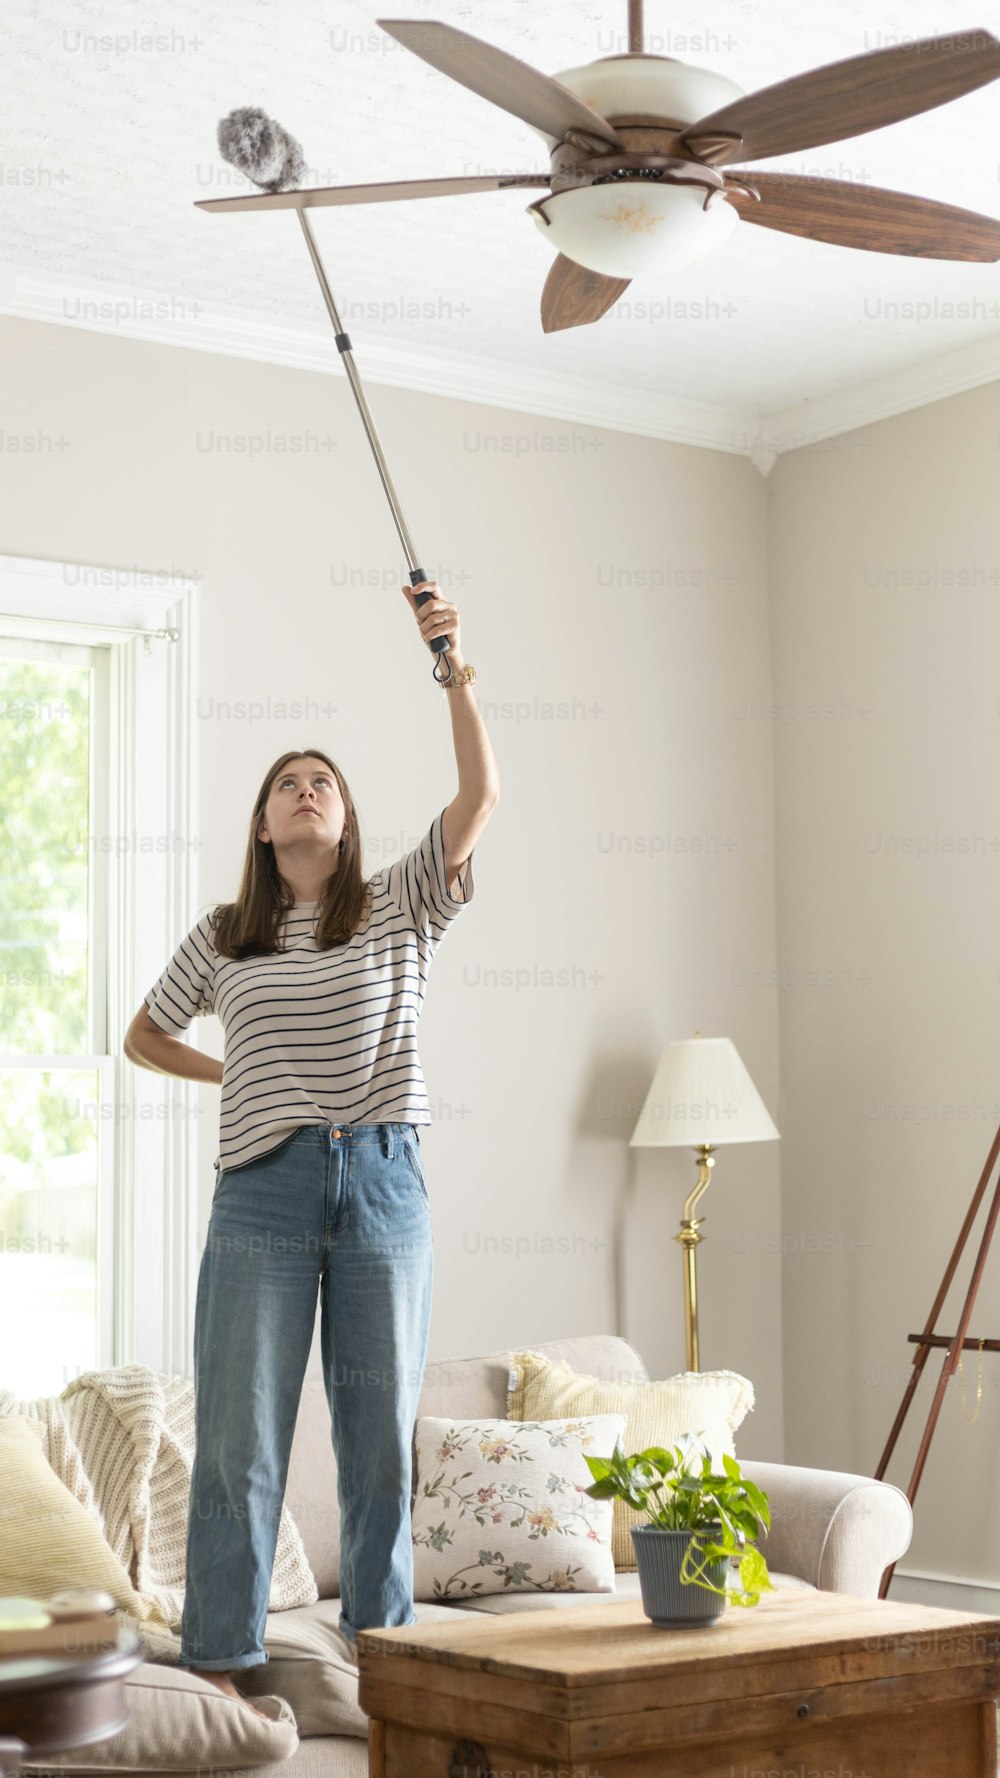 a woman standing in a living room holding a ceiling fan